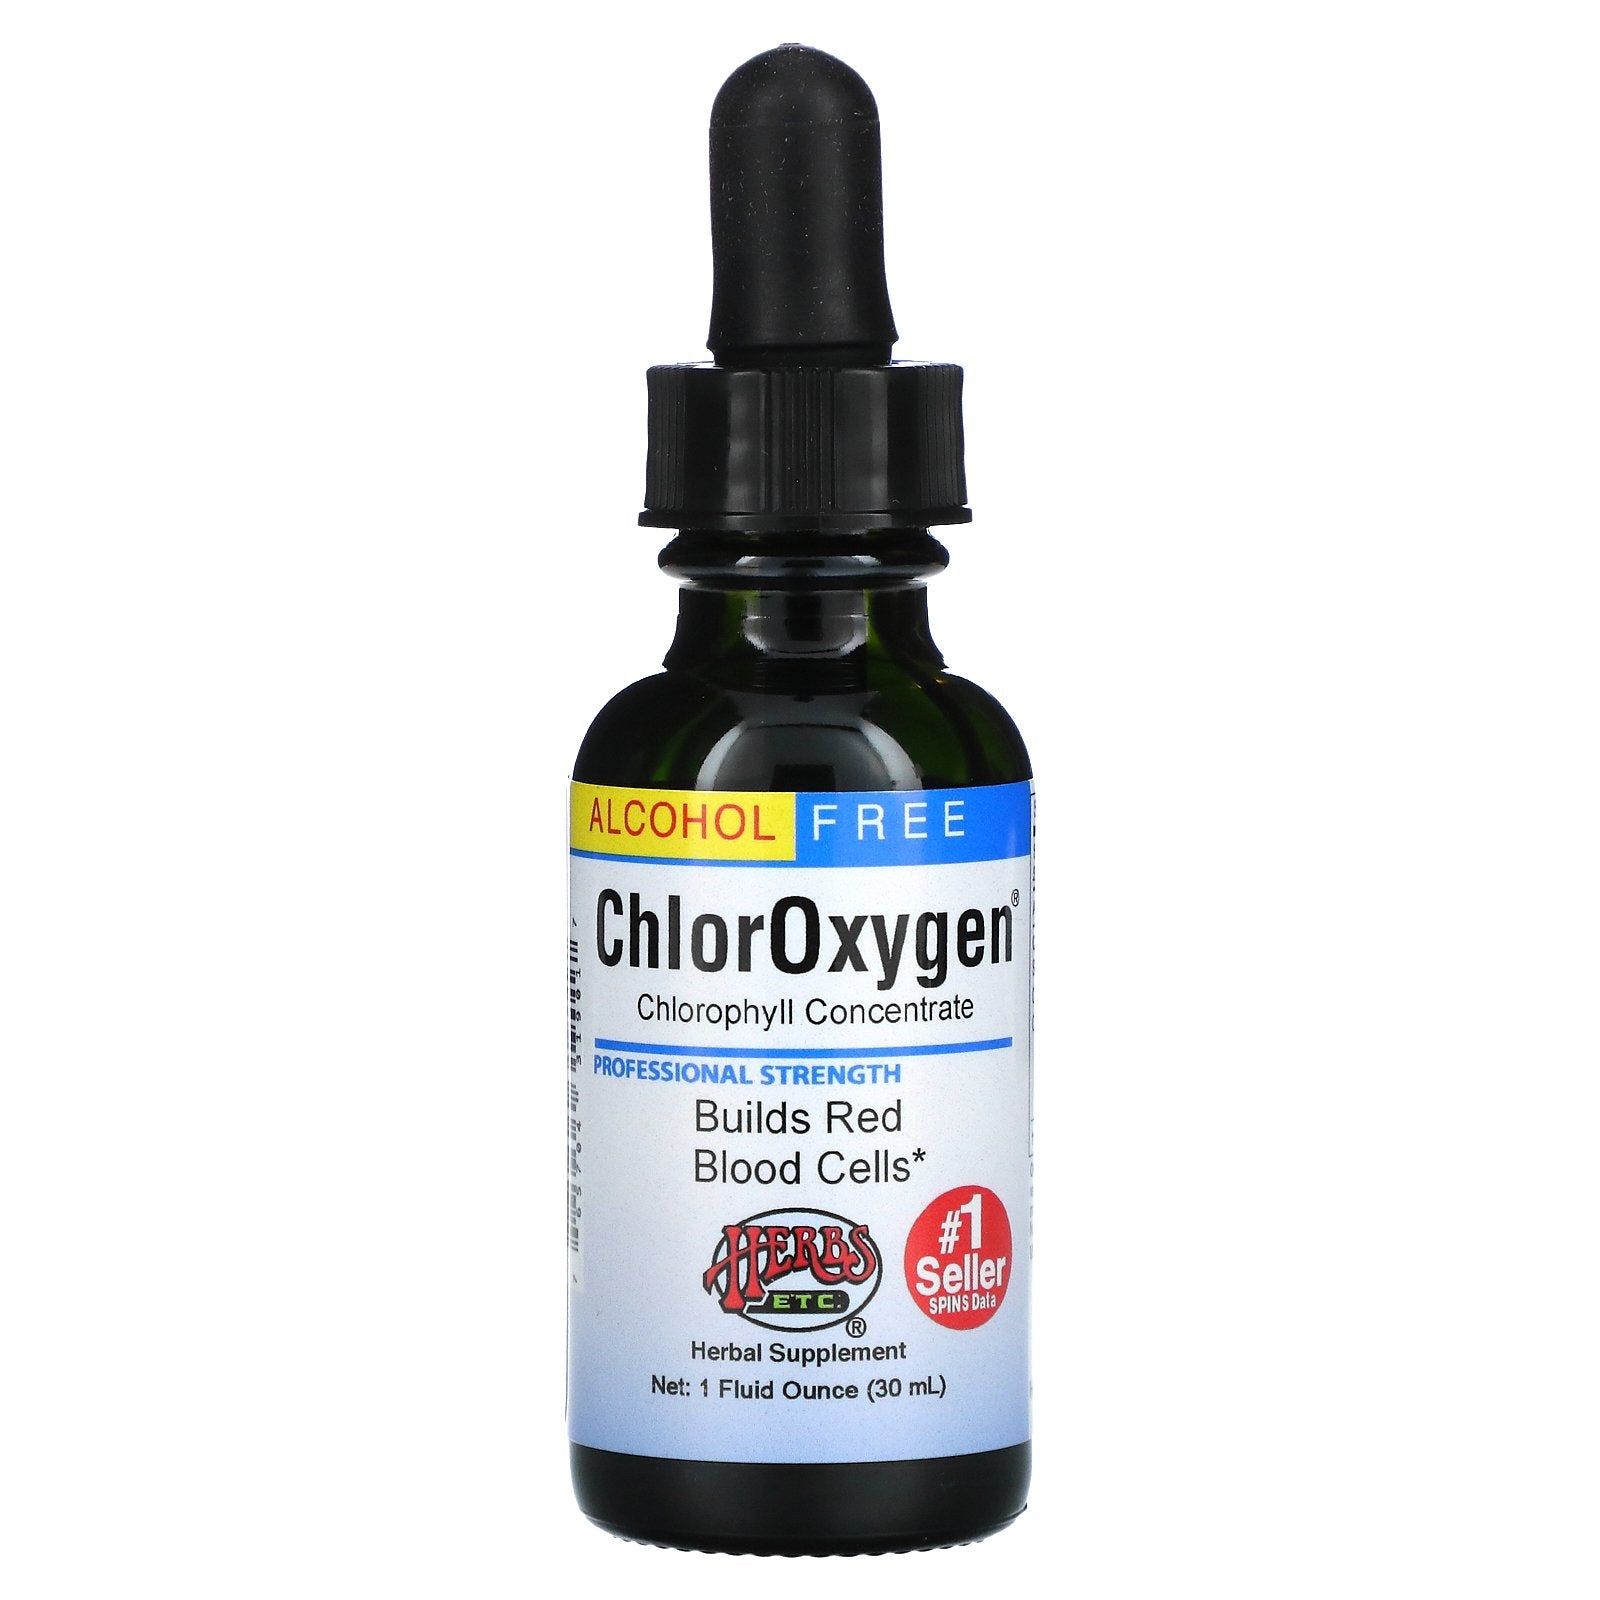 Herbs Etc., ChlorOxygen, Chlorophyll Concentrate, Alcohol Free